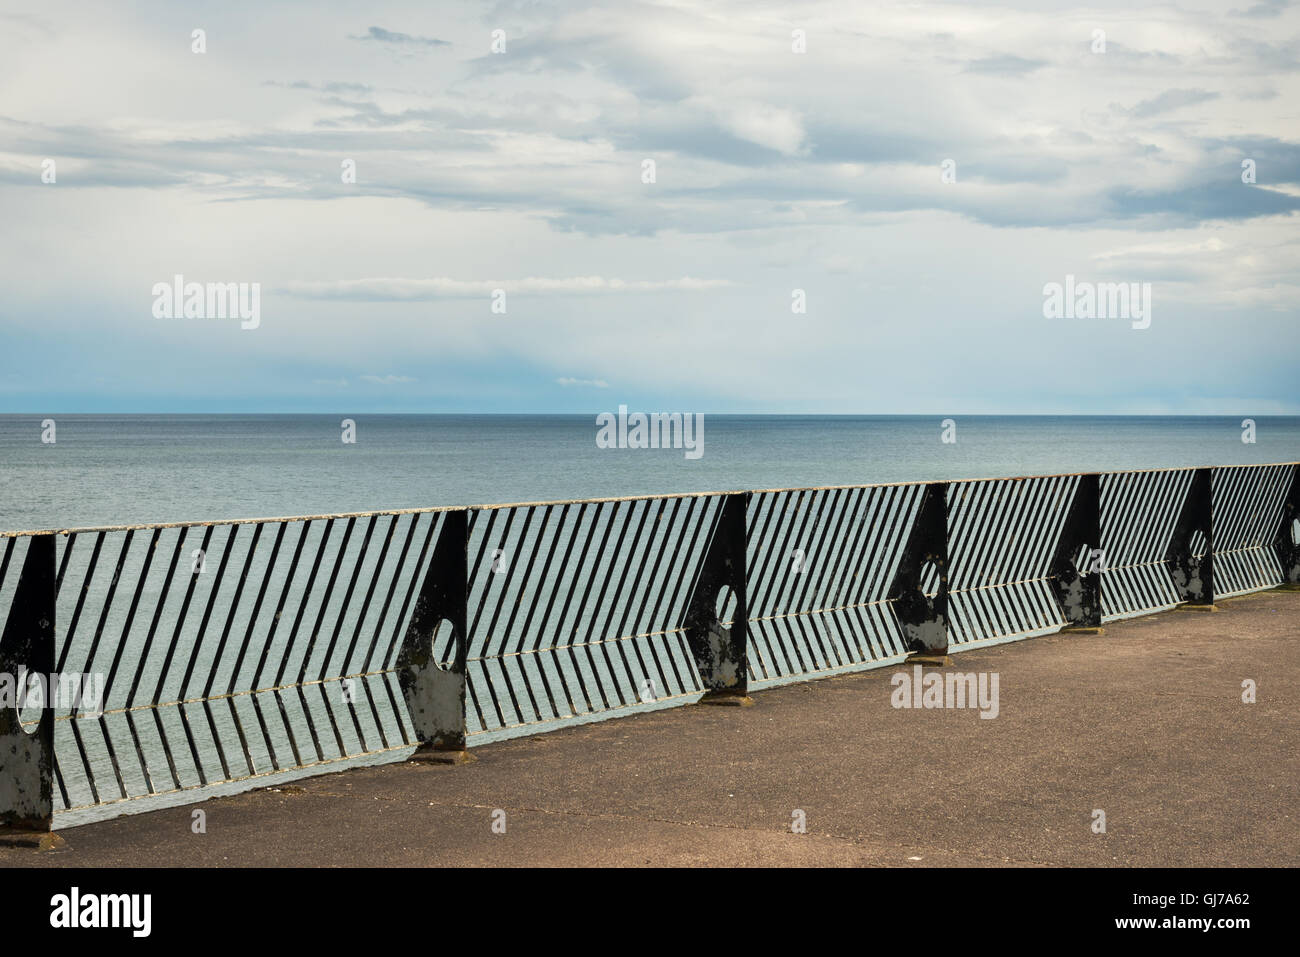 Youghal seafront empty concrete platform deck with metal railings facing open sea Stock Photo